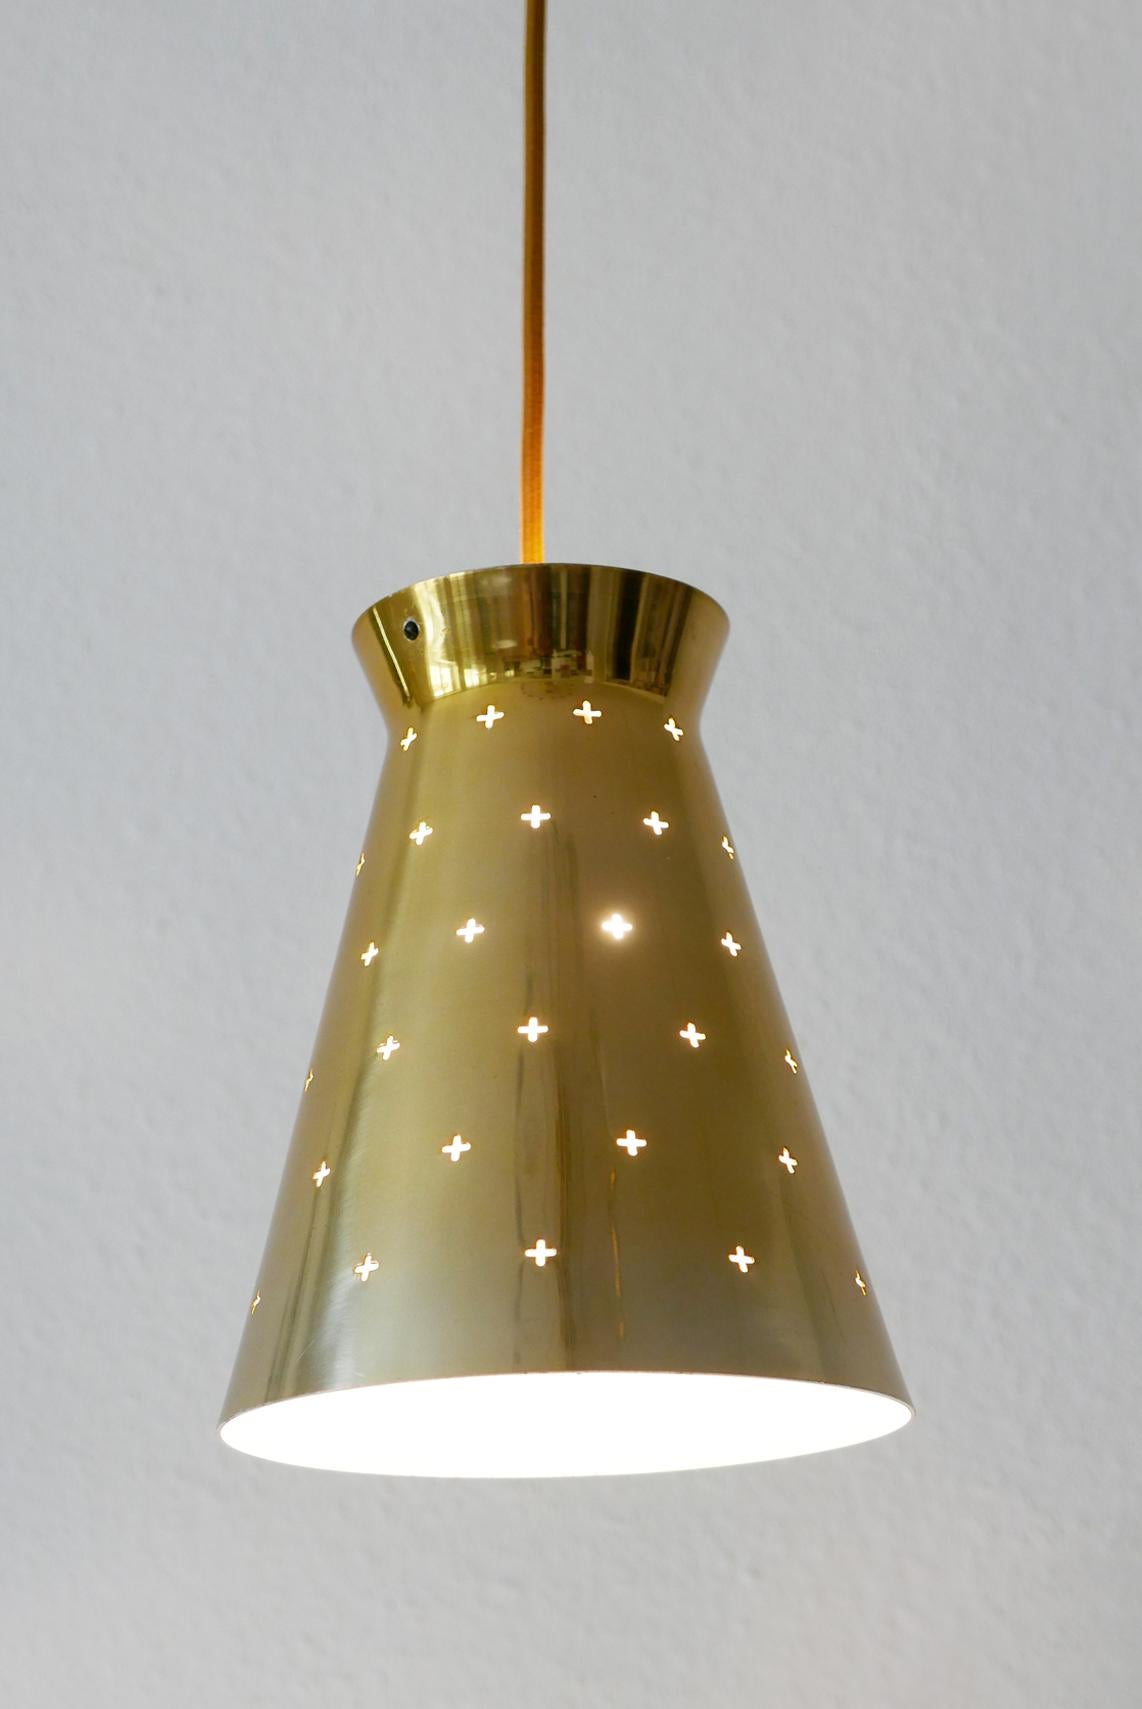 Elegant Mid-Century Modern diabolo pendant lamp. Designed and manufactured by Hillebrand Leuchtenfabrik, 1950s, Germany.

Executed in perforated and brass anodized aluminium. The lamp needs 1 x E27 Edison screw fit bulb, is wired, and in working